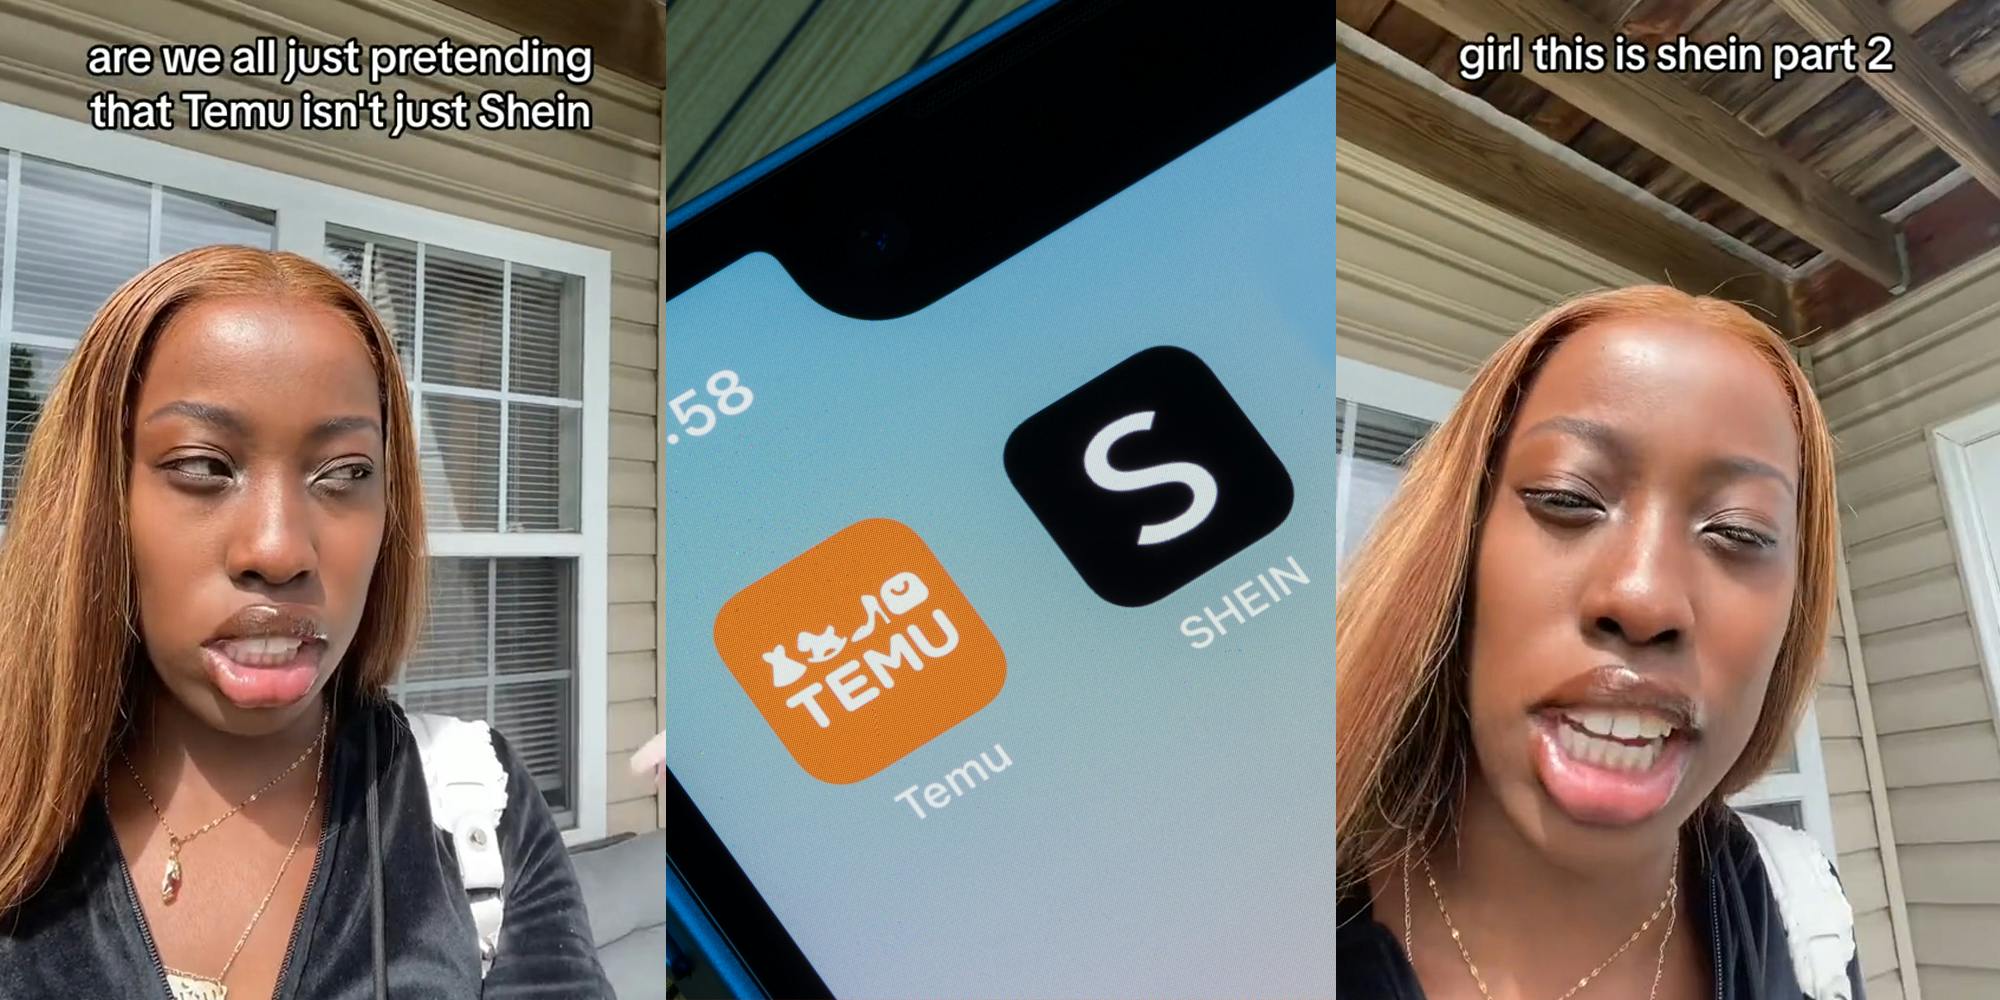 shopper speaking with caption "are we all just pretending that Temu isn't just Shein" (l) Temu and Shein apps on phone homescreen (c) shopper speaking with caption "girl this is Shein part 2" (r)